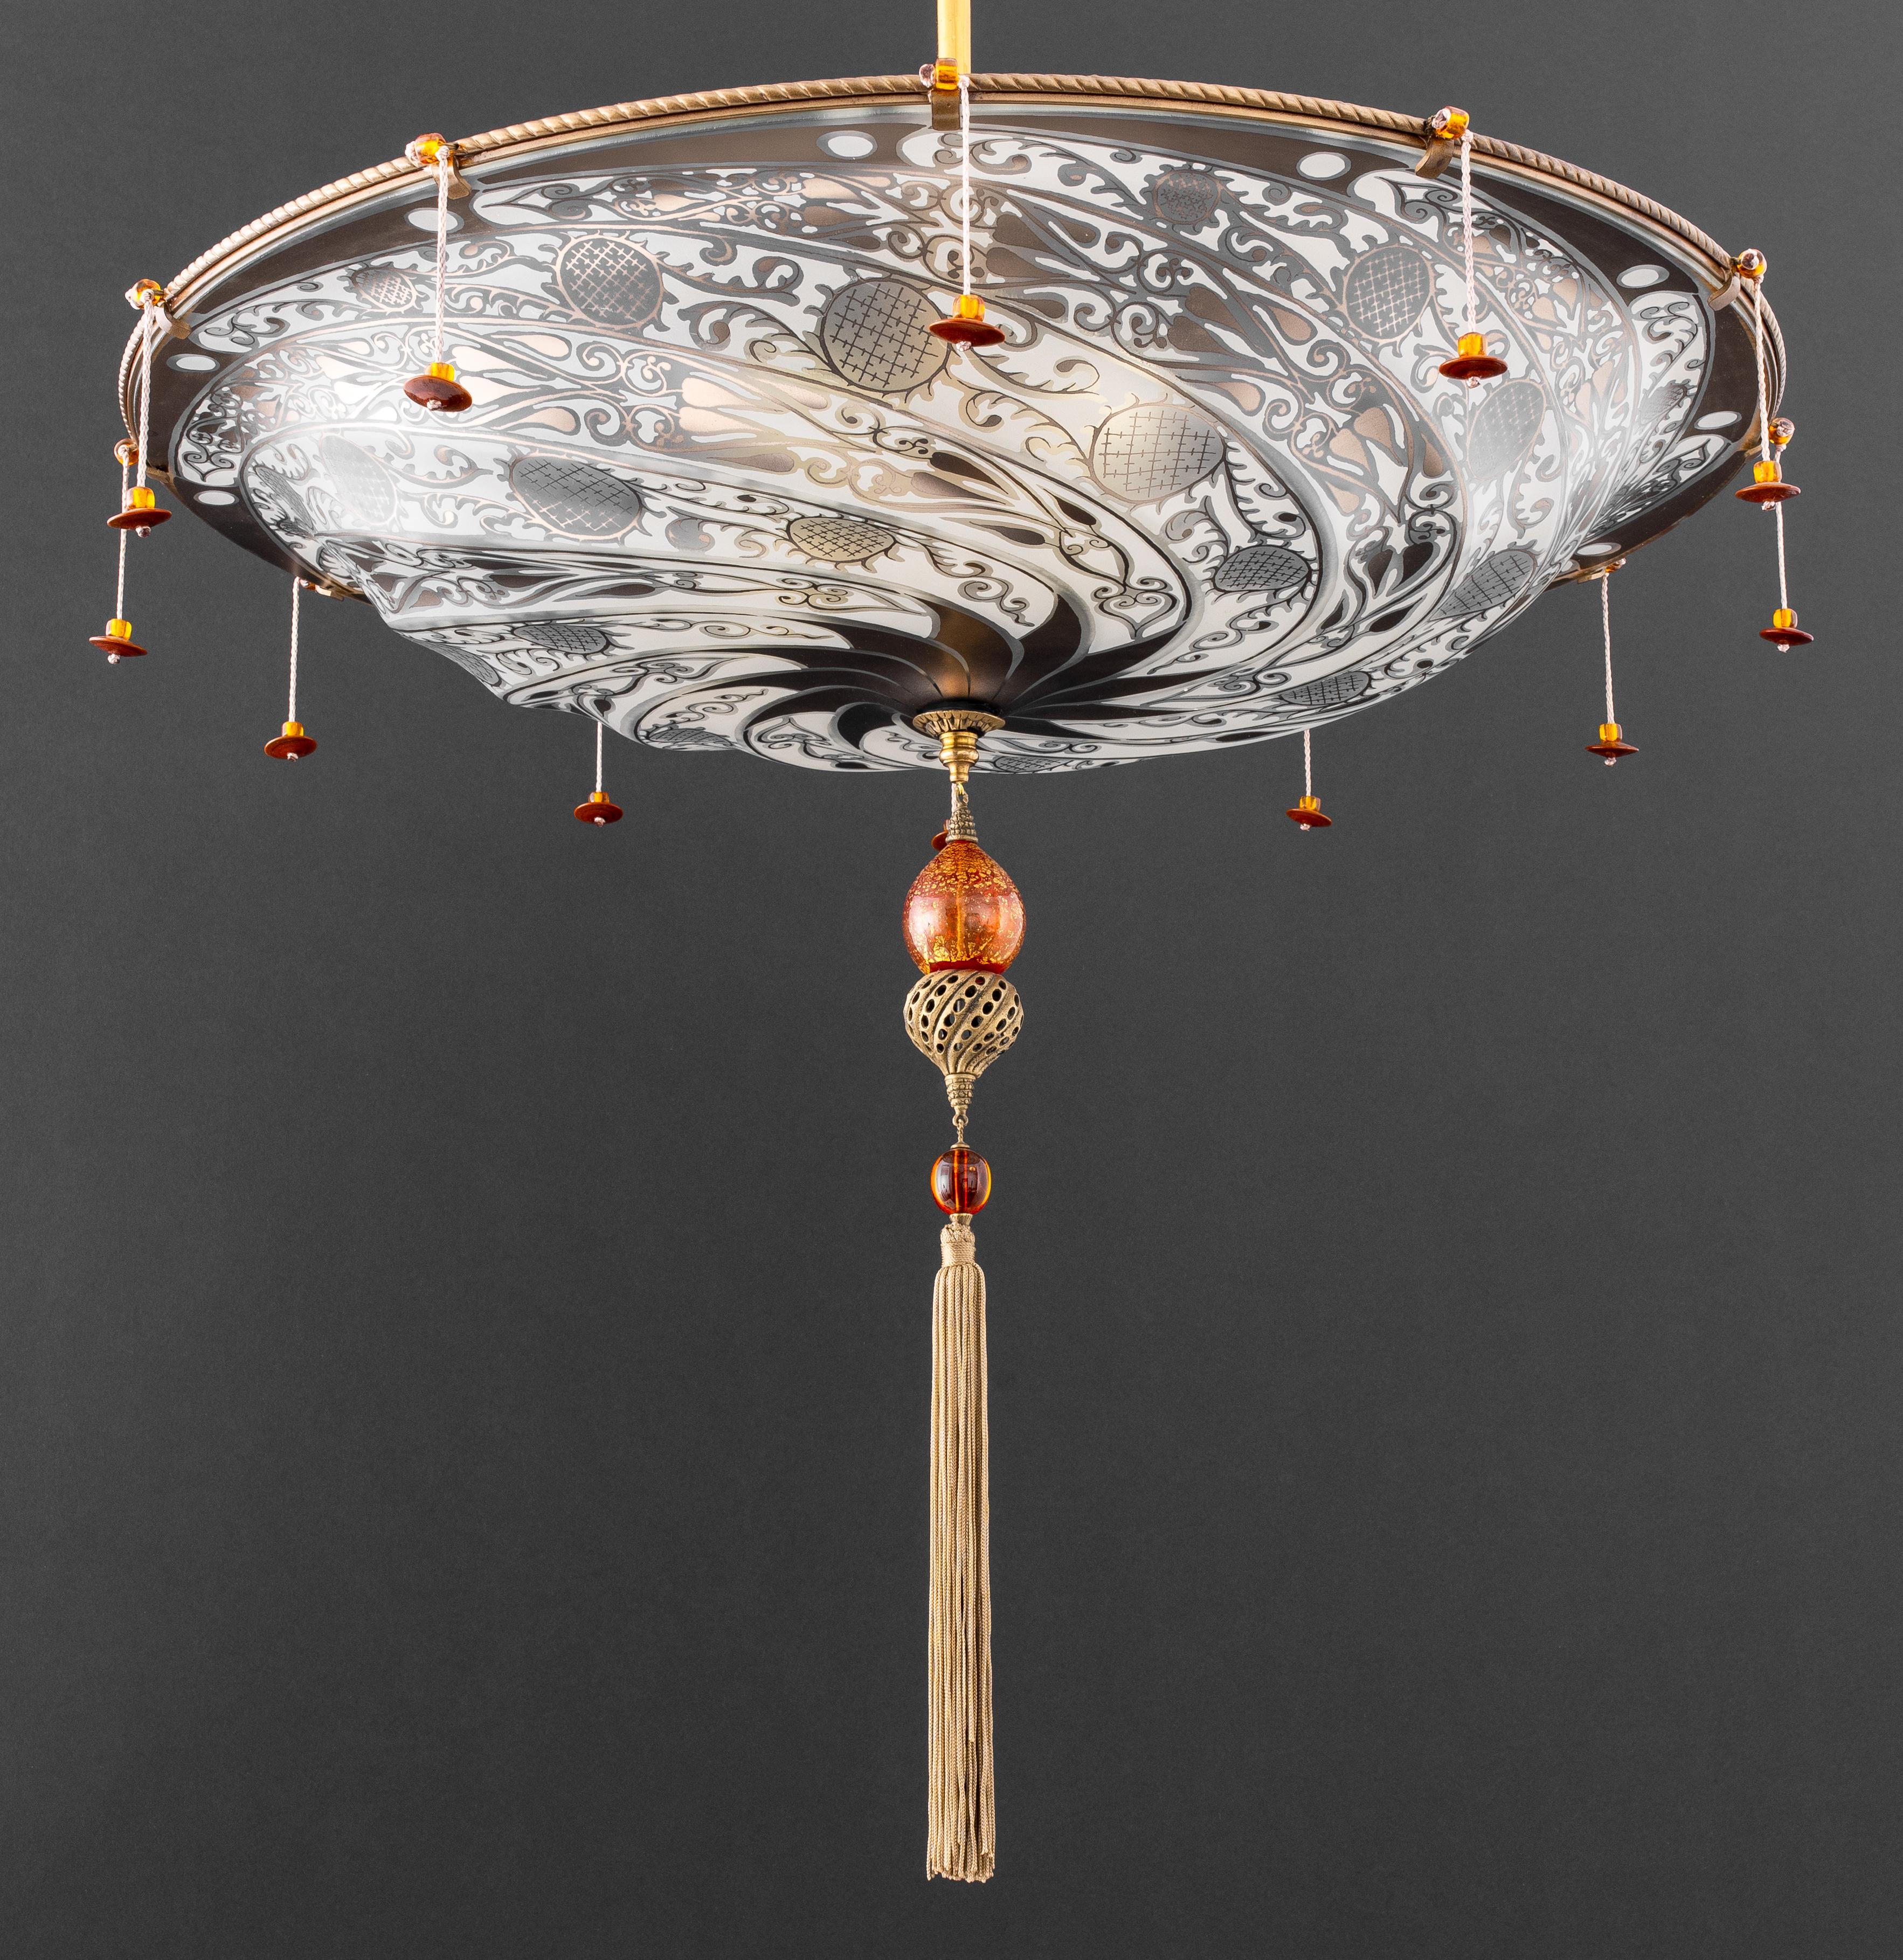 Archeo Venice Design Murano Glass Hanging Pendant Lamp, in the manner of Fortuny, struck 